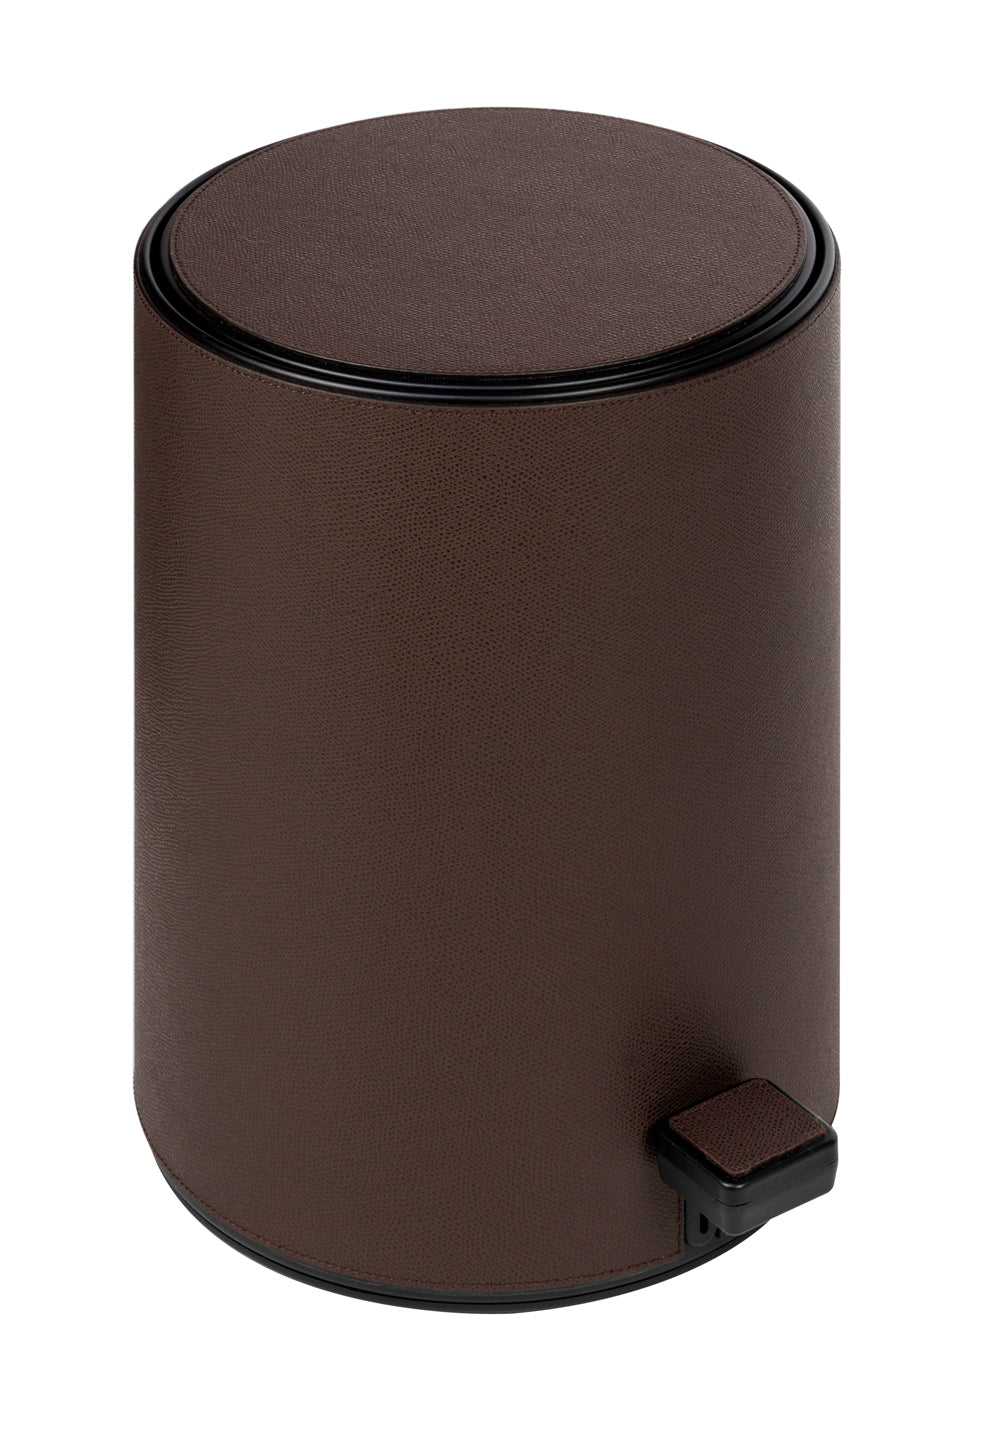 Giobagnara Jazz Leather-Covered Metal Pedal Bin With Removable Plastic Container | Elegant design featuring a leather-covered metal exterior | Equipped with a convenient pedal for hands-free operation | Includes a removable plastic container for easy cleaning | Discover luxury lifestyle accessories at 2Jour Concierge, #1 luxury high-end gift & lifestyle shop